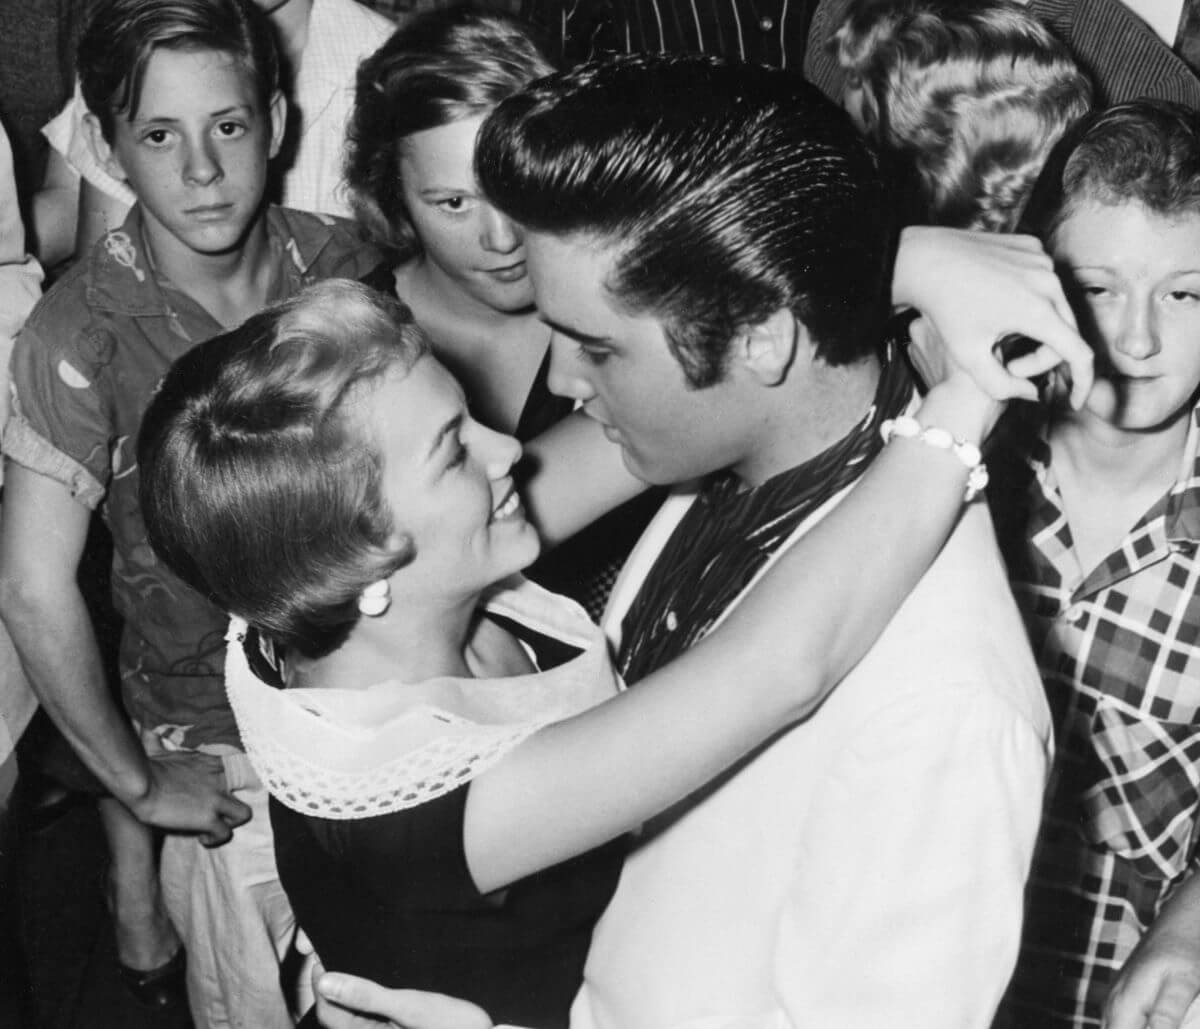 A black and white picture of Elvis and Anita Wood dancing in a crowd of people. She has her arms around his neck.